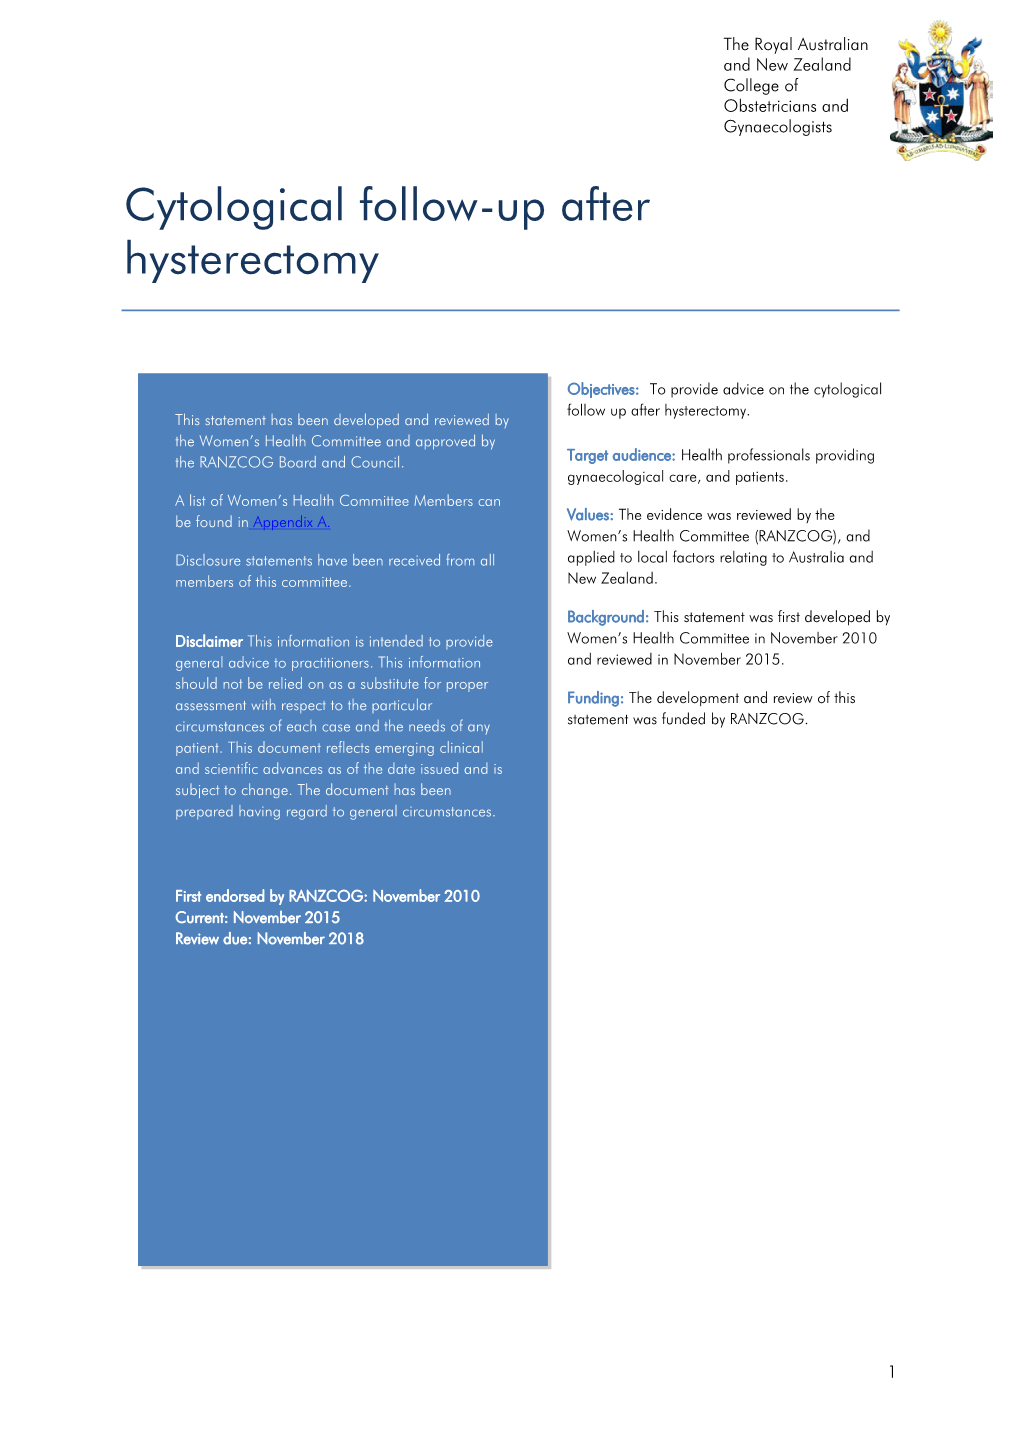 Cytological Follow-Up After Hysterectomy